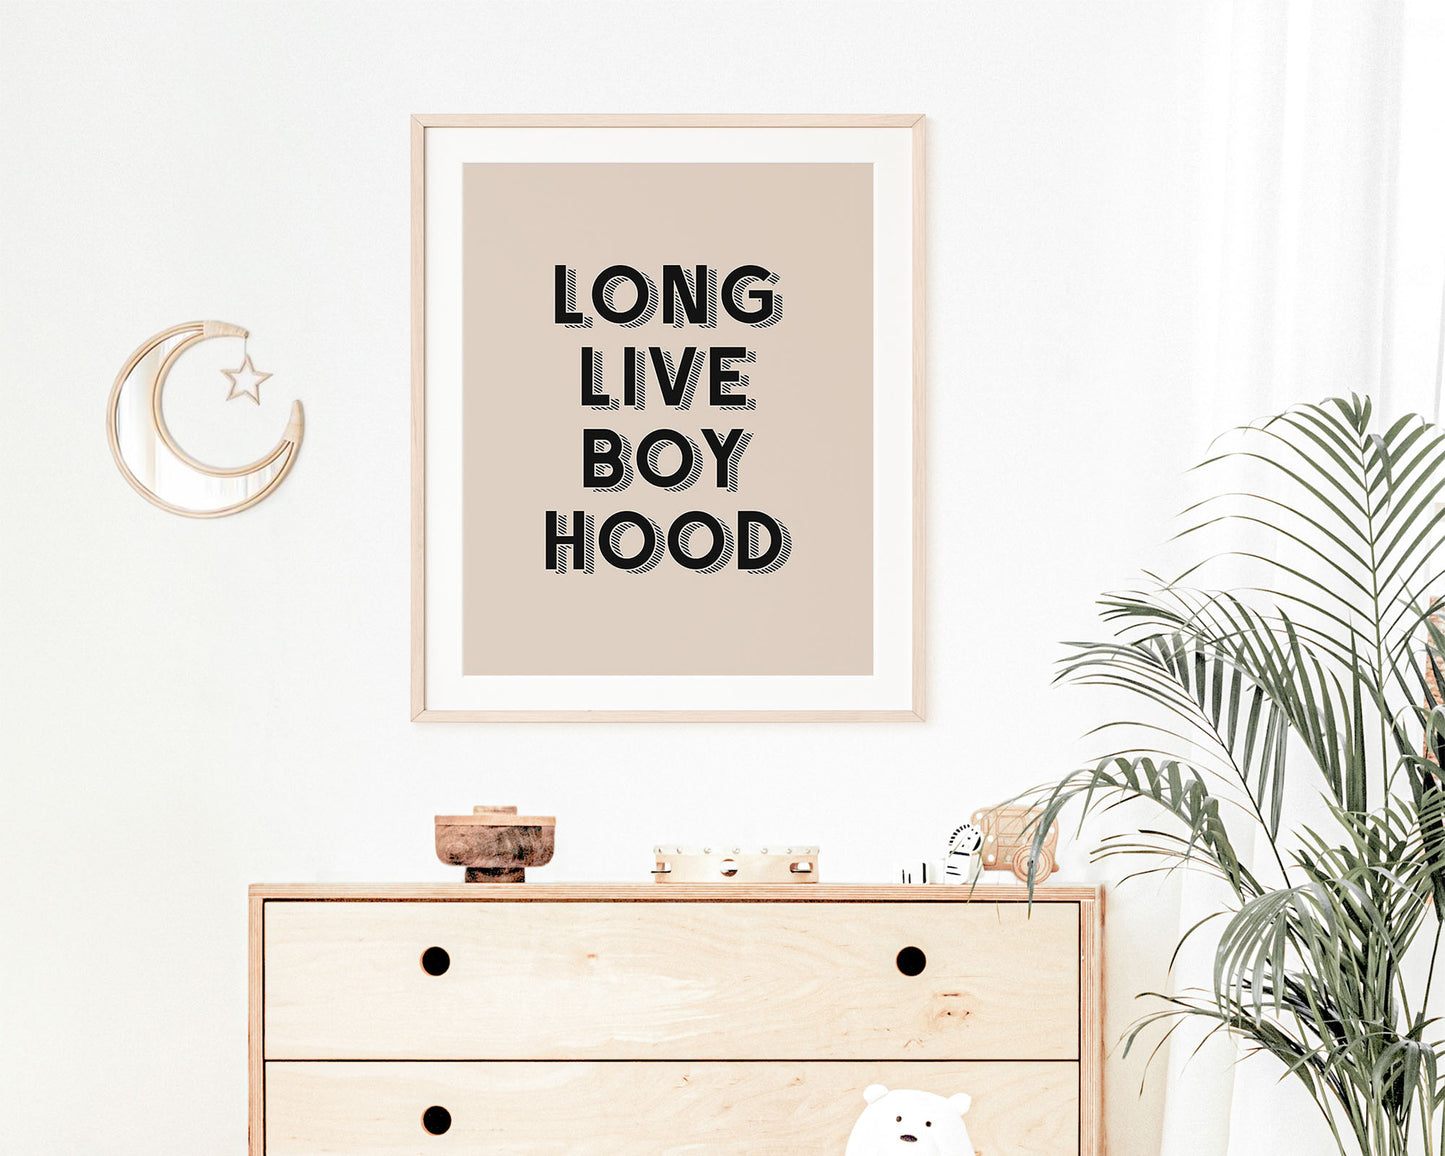 Long Live Boy Hood Printable Wall Art featuring retro block shadowed lettering in black on a neutral tan background. Perfect for Baby Boy Nursery Decor, Toddler Boy Bedroom Decor or Children's Play Room Wall Art. Prints up to 24" x 36"